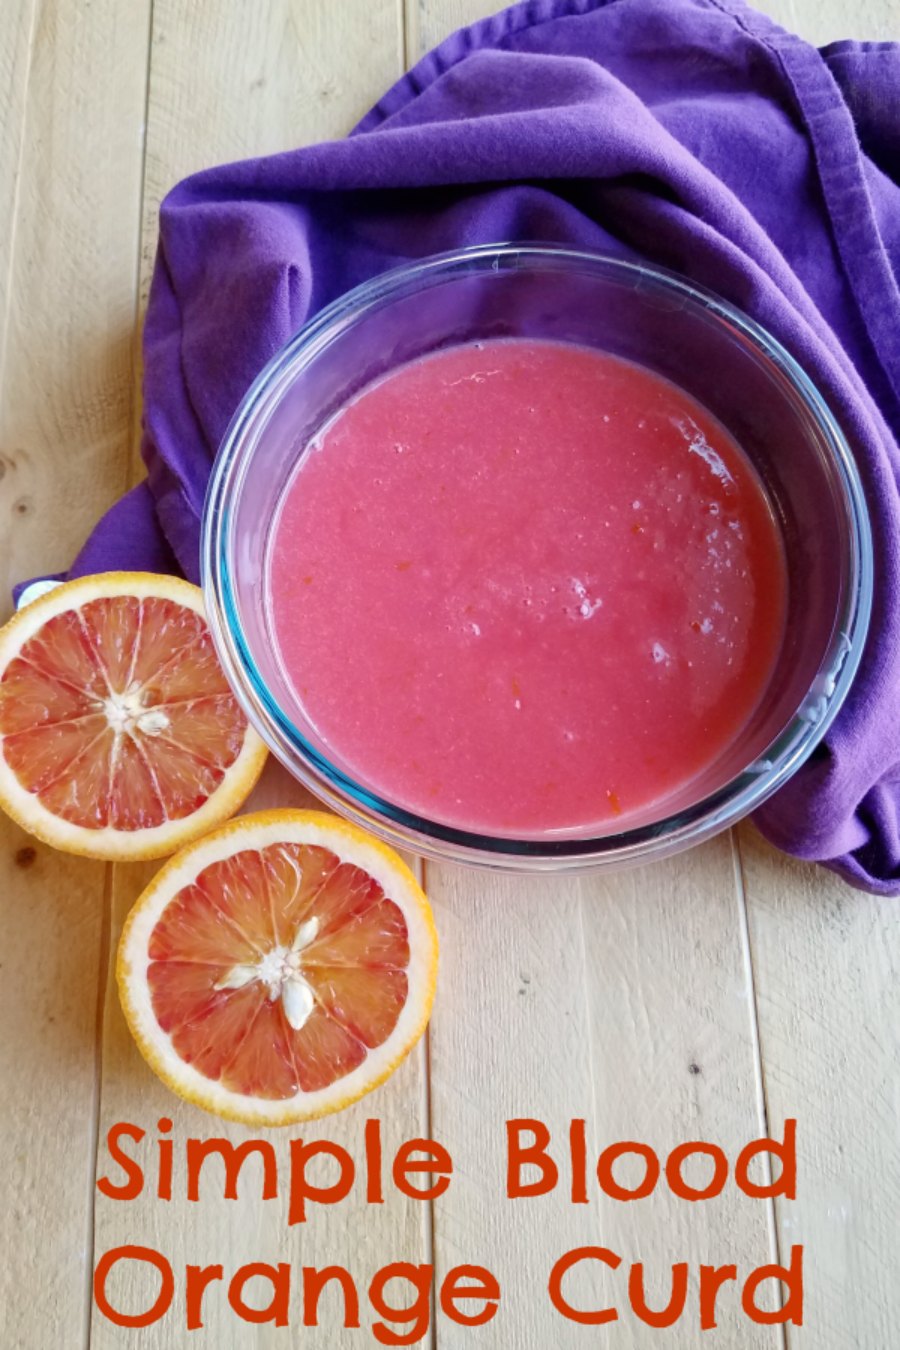 This fun and citrusy blood orange curd is the perfect sweet spread for so many things. It is super simple to make too!